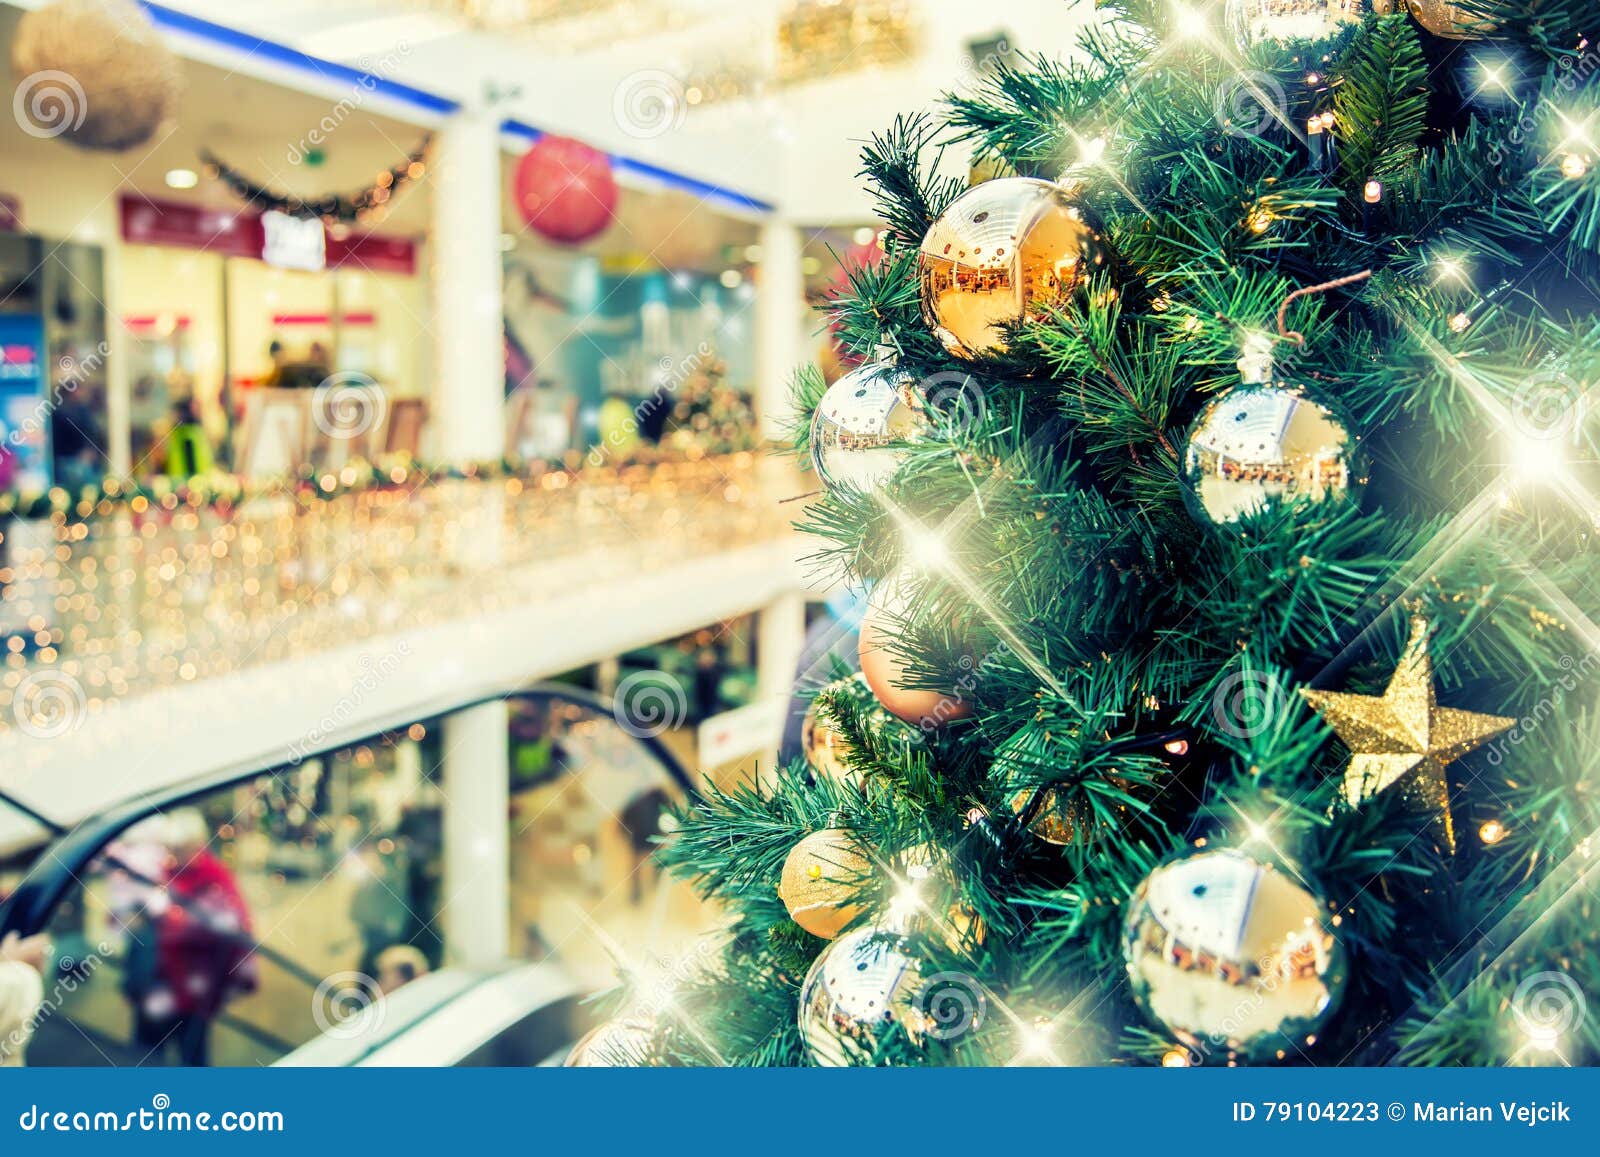 Christmas Tree with Gold Decoration in Shopping Mall. Stock Image